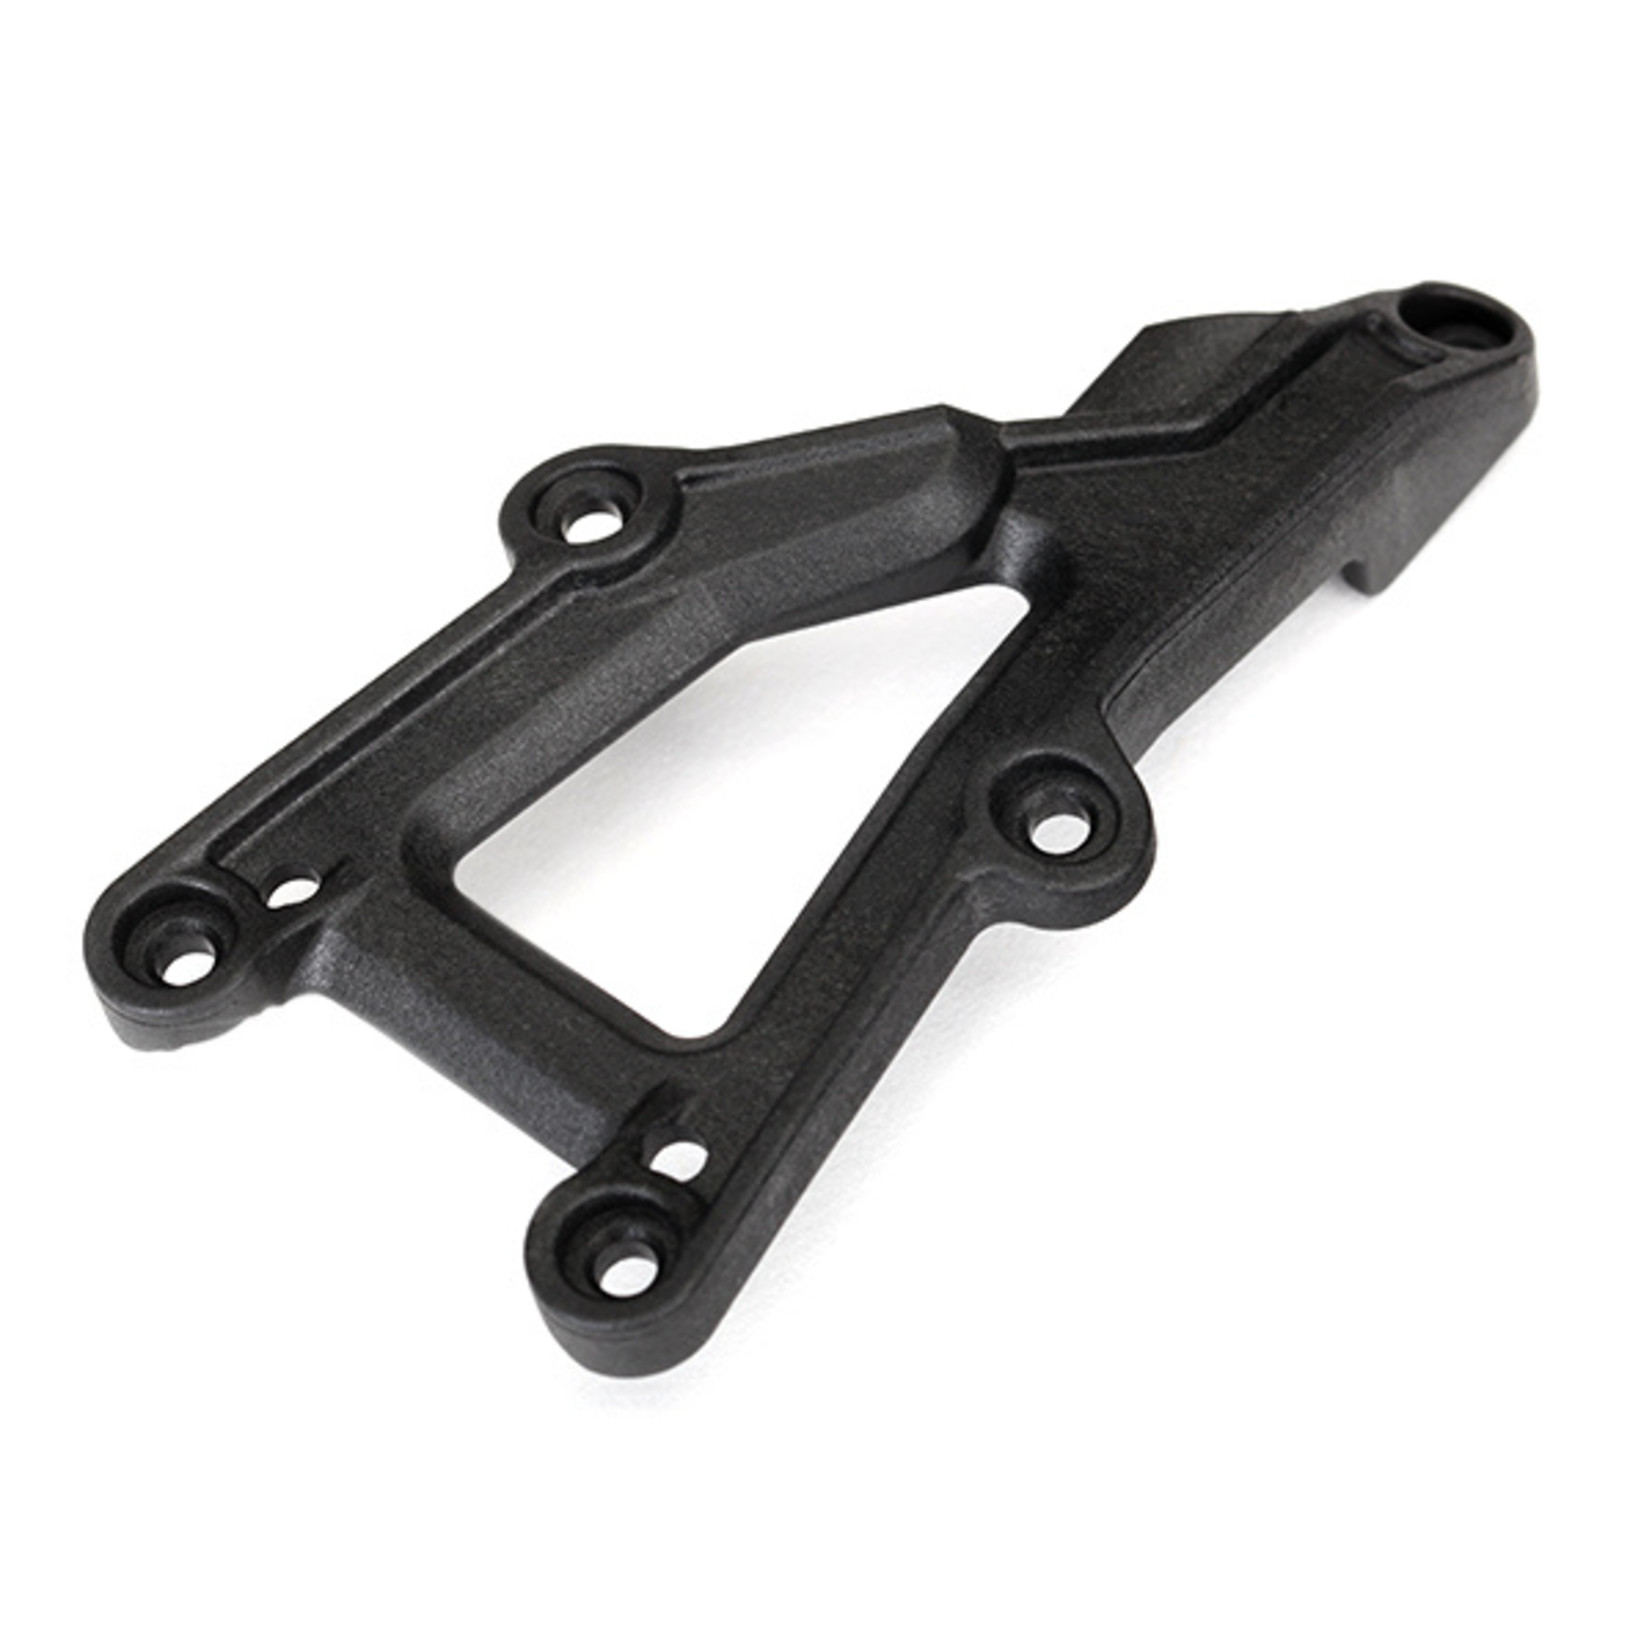 Traxxas 8321 - Chassis brace (front)